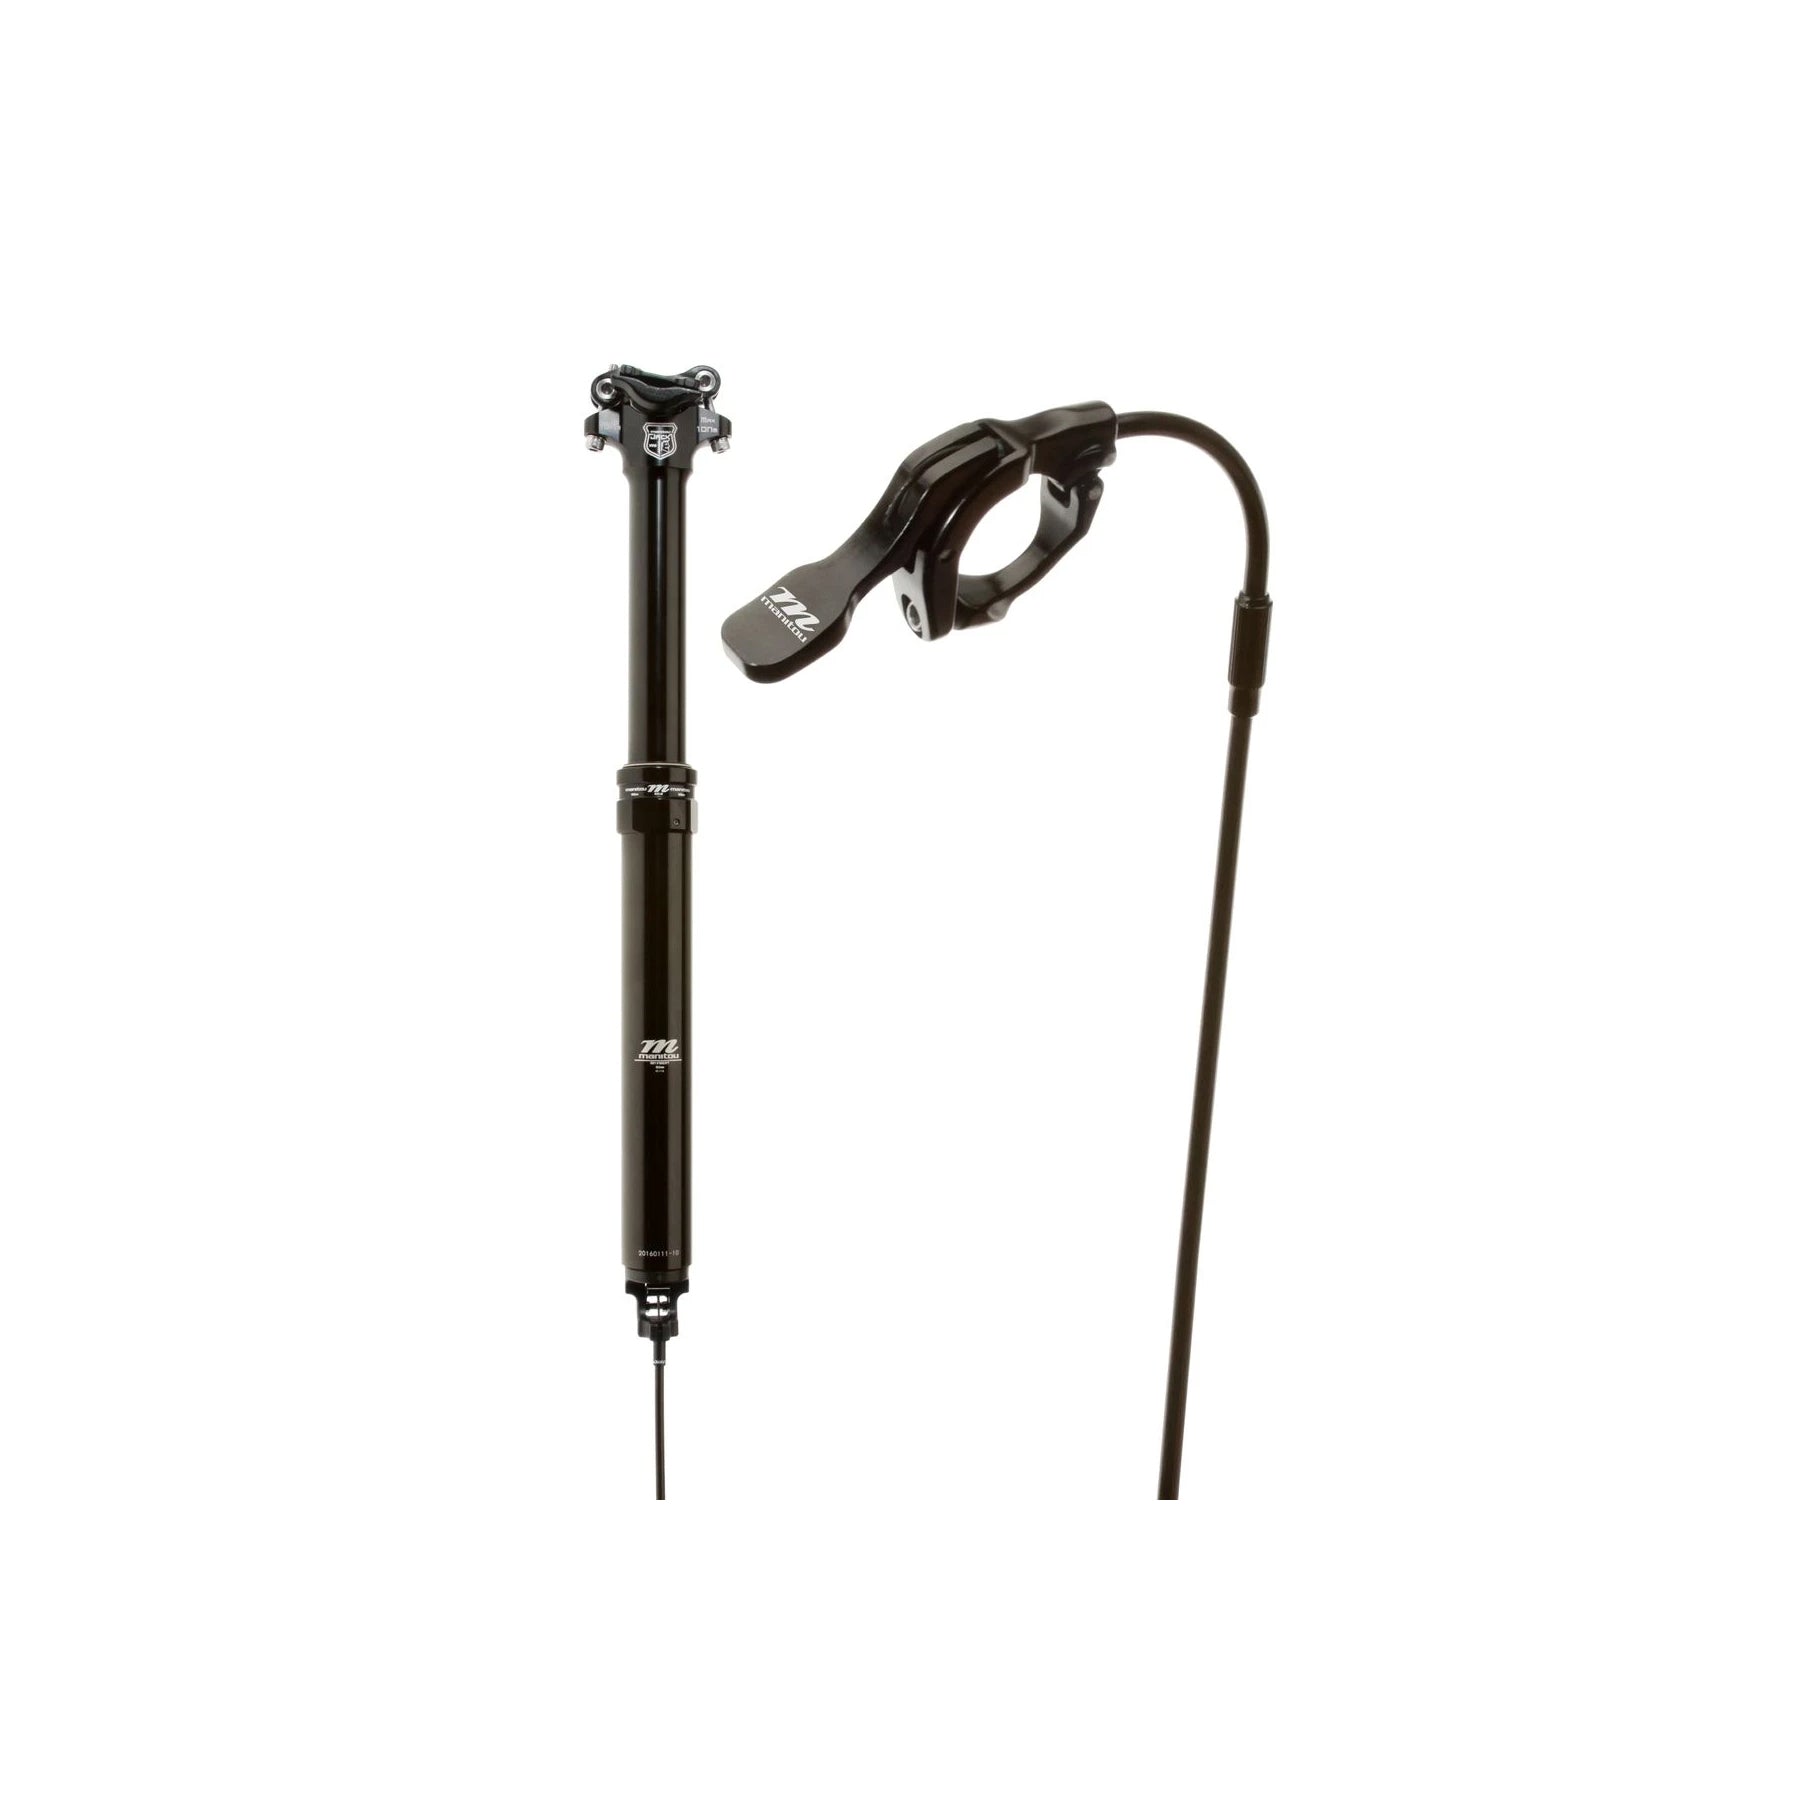 VERTICAL Dropper Post Bowdenzug Set Kit One - Ultralight Cable Kit, 14,50 €